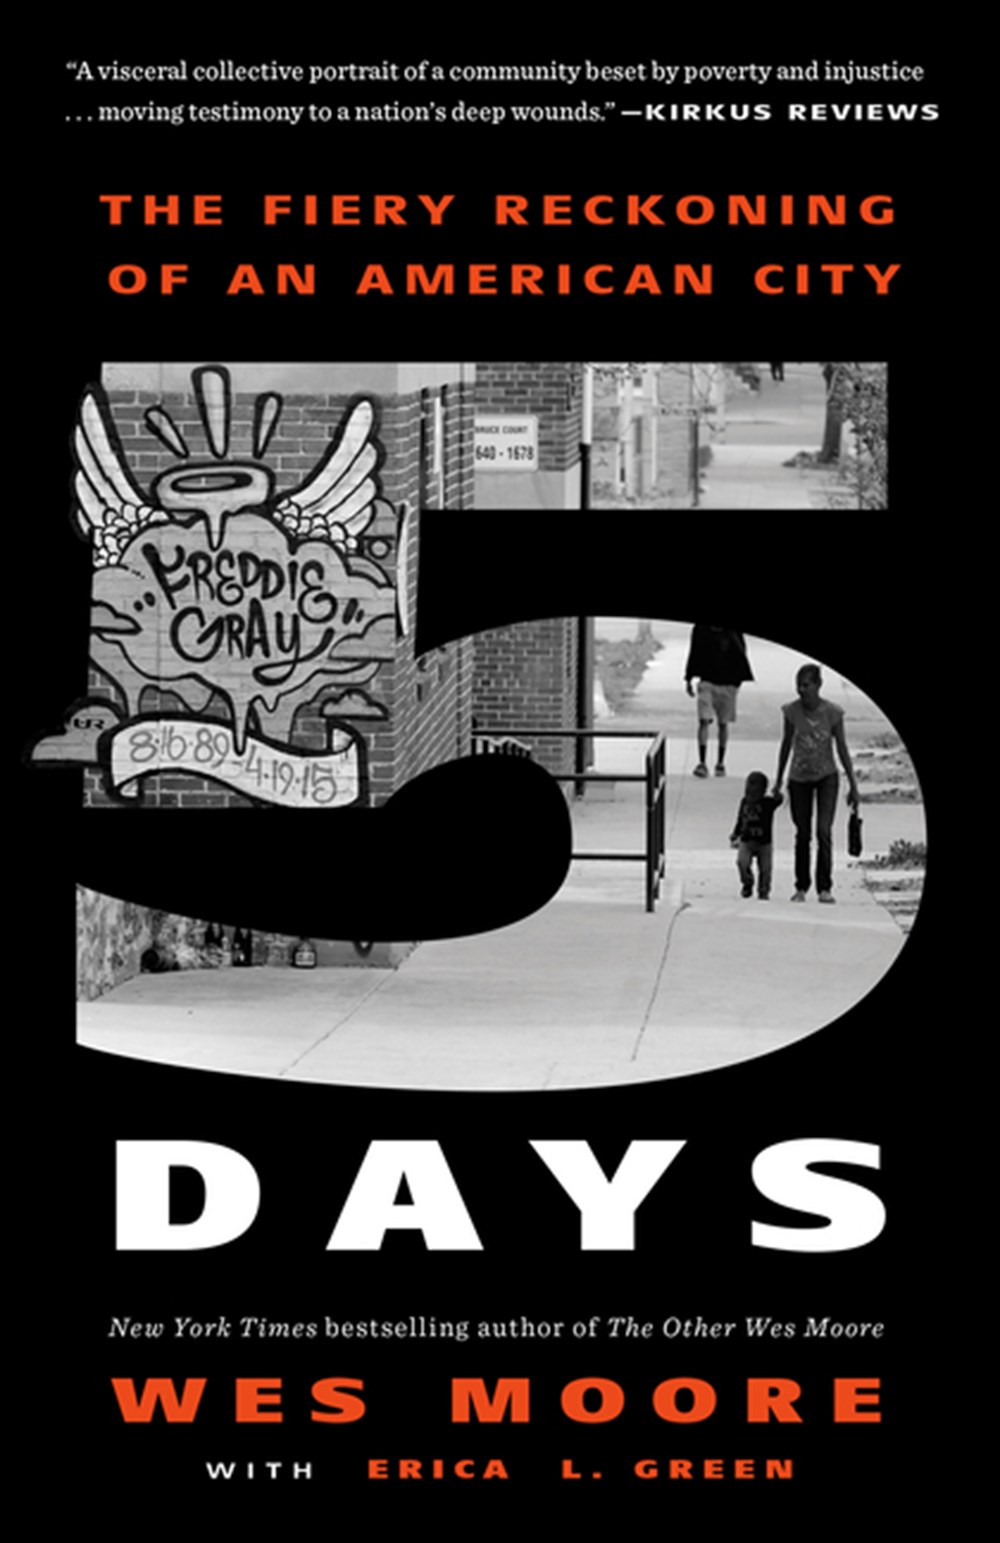 Five Days The Fiery Reckoning of an American City